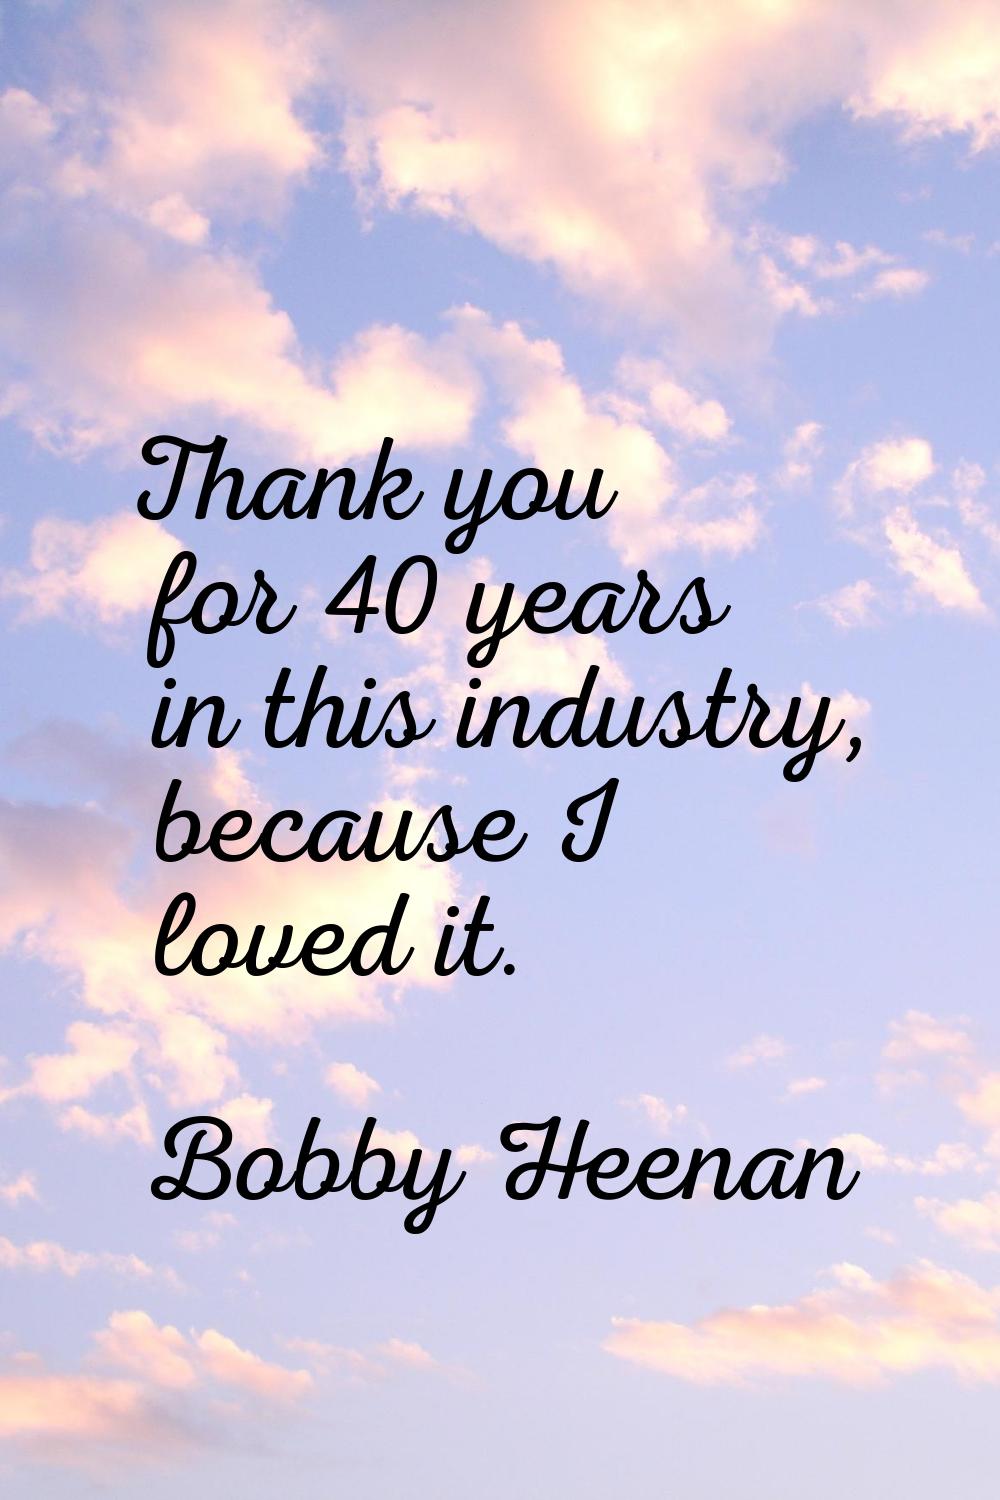 Thank you for 40 years in this industry, because I loved it.